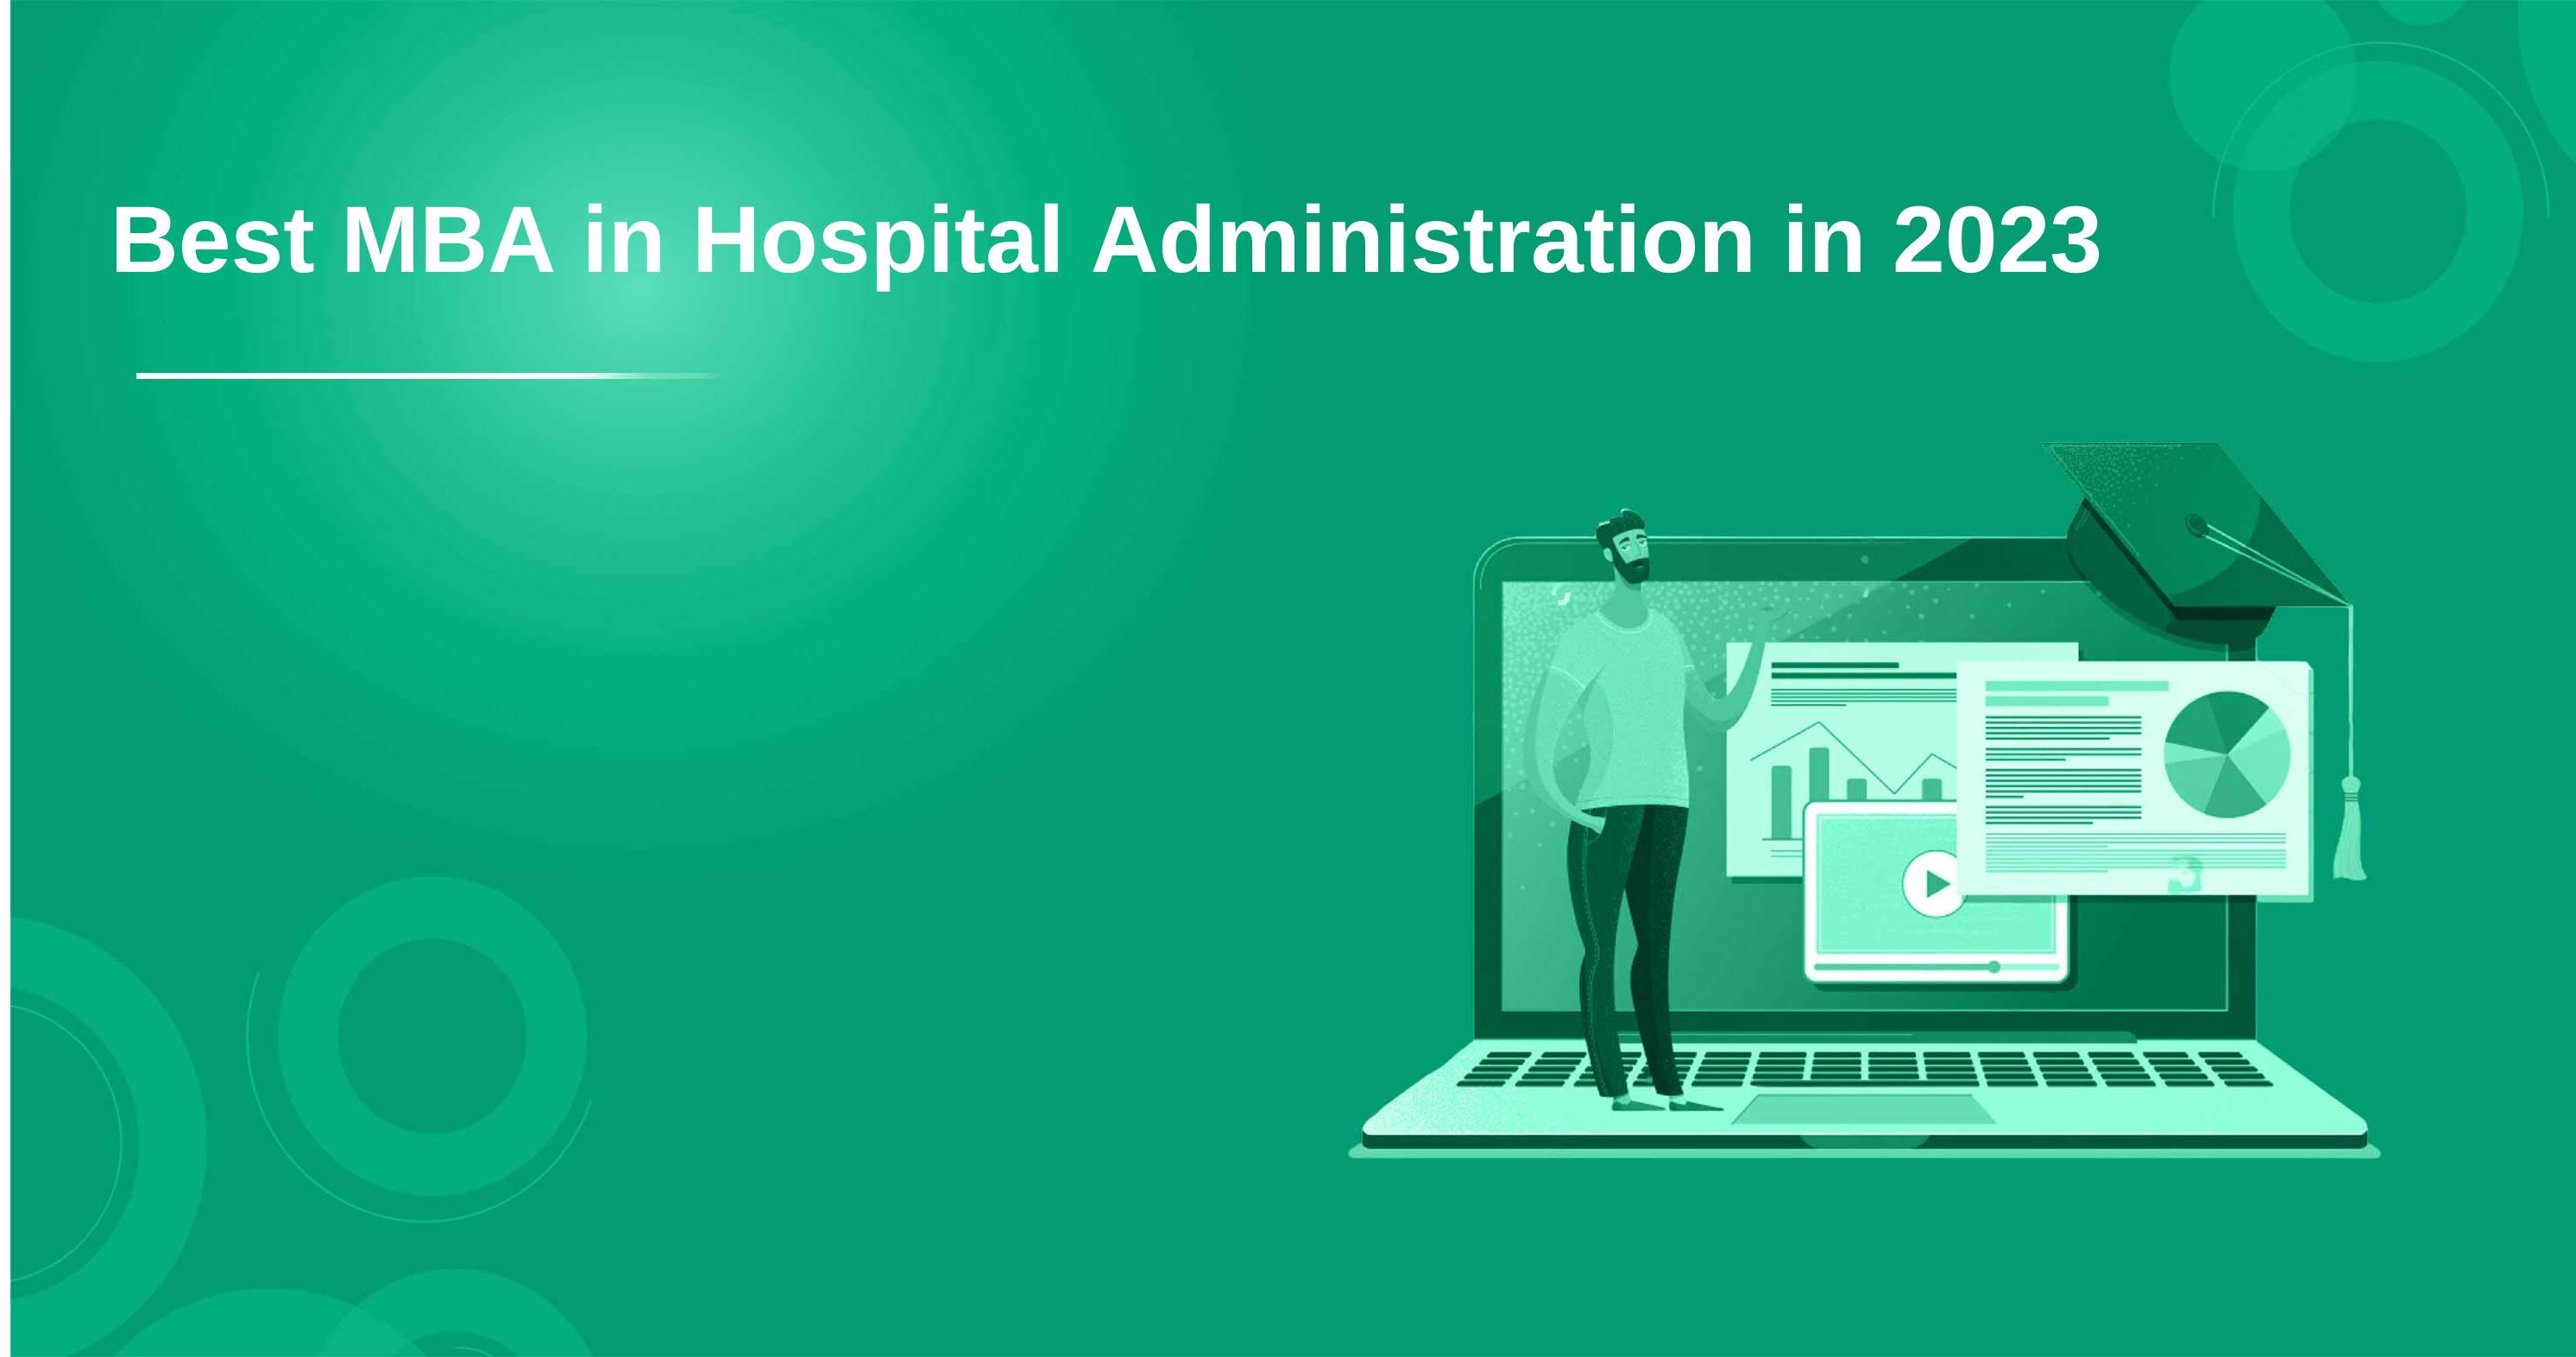 Best MBA in Hospital Administration in 2023